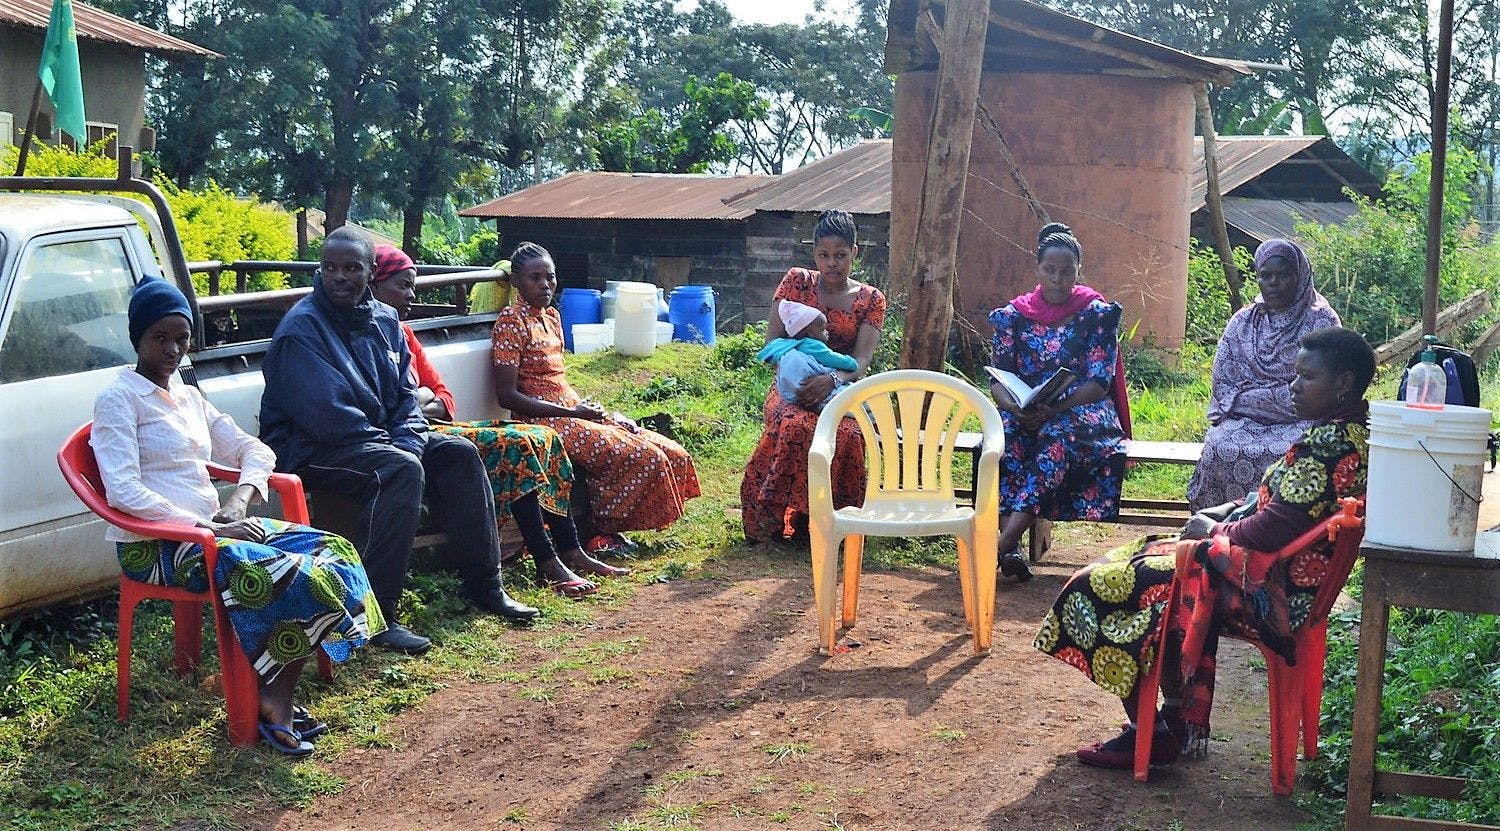 United by Change: How to address COVID-19 in smallholder communities